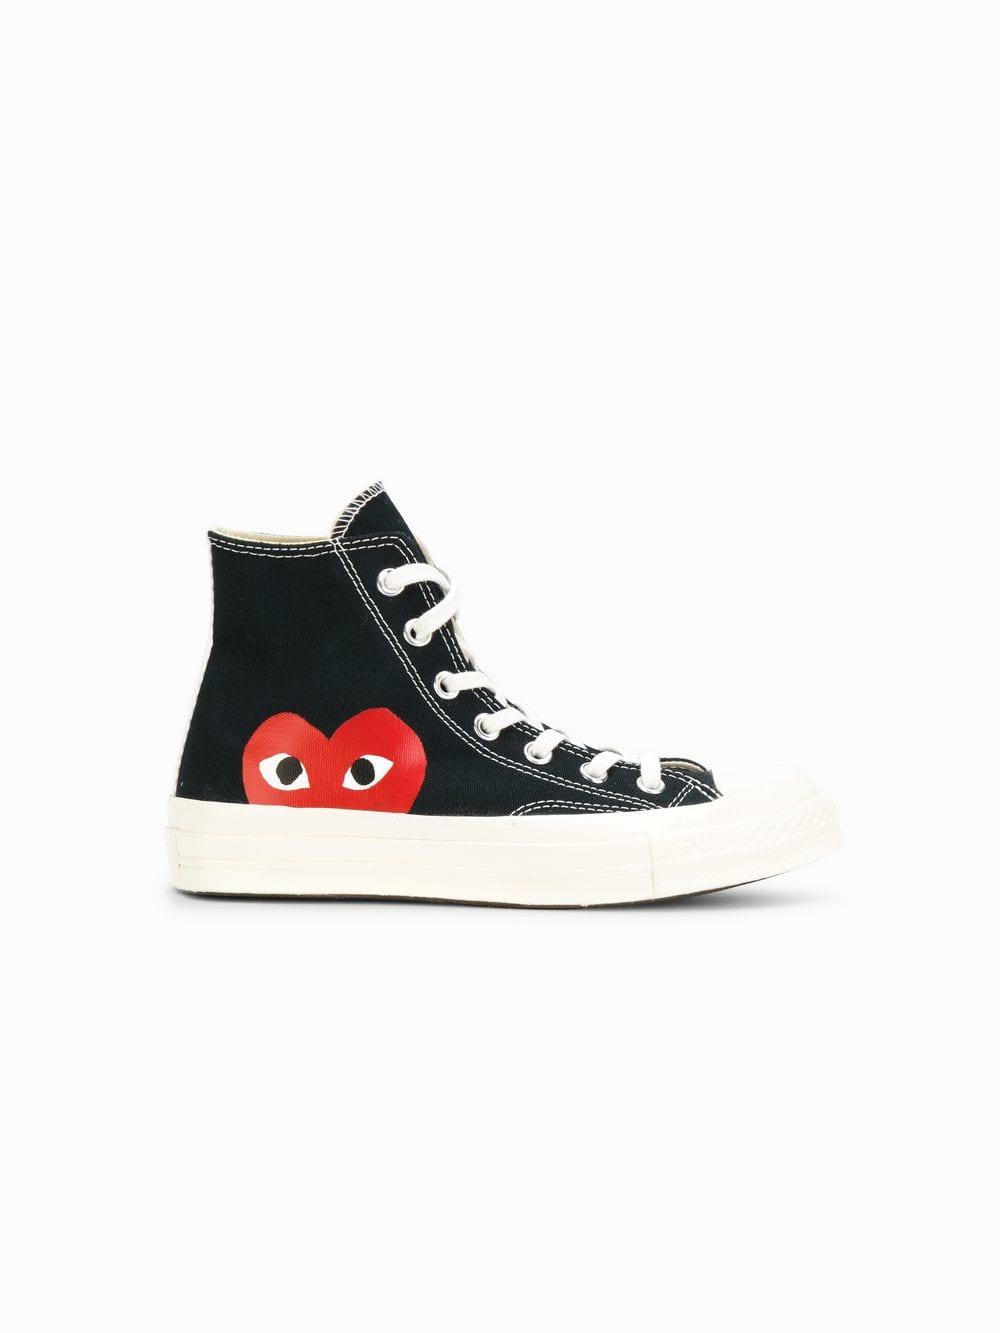 black high top converse with heart